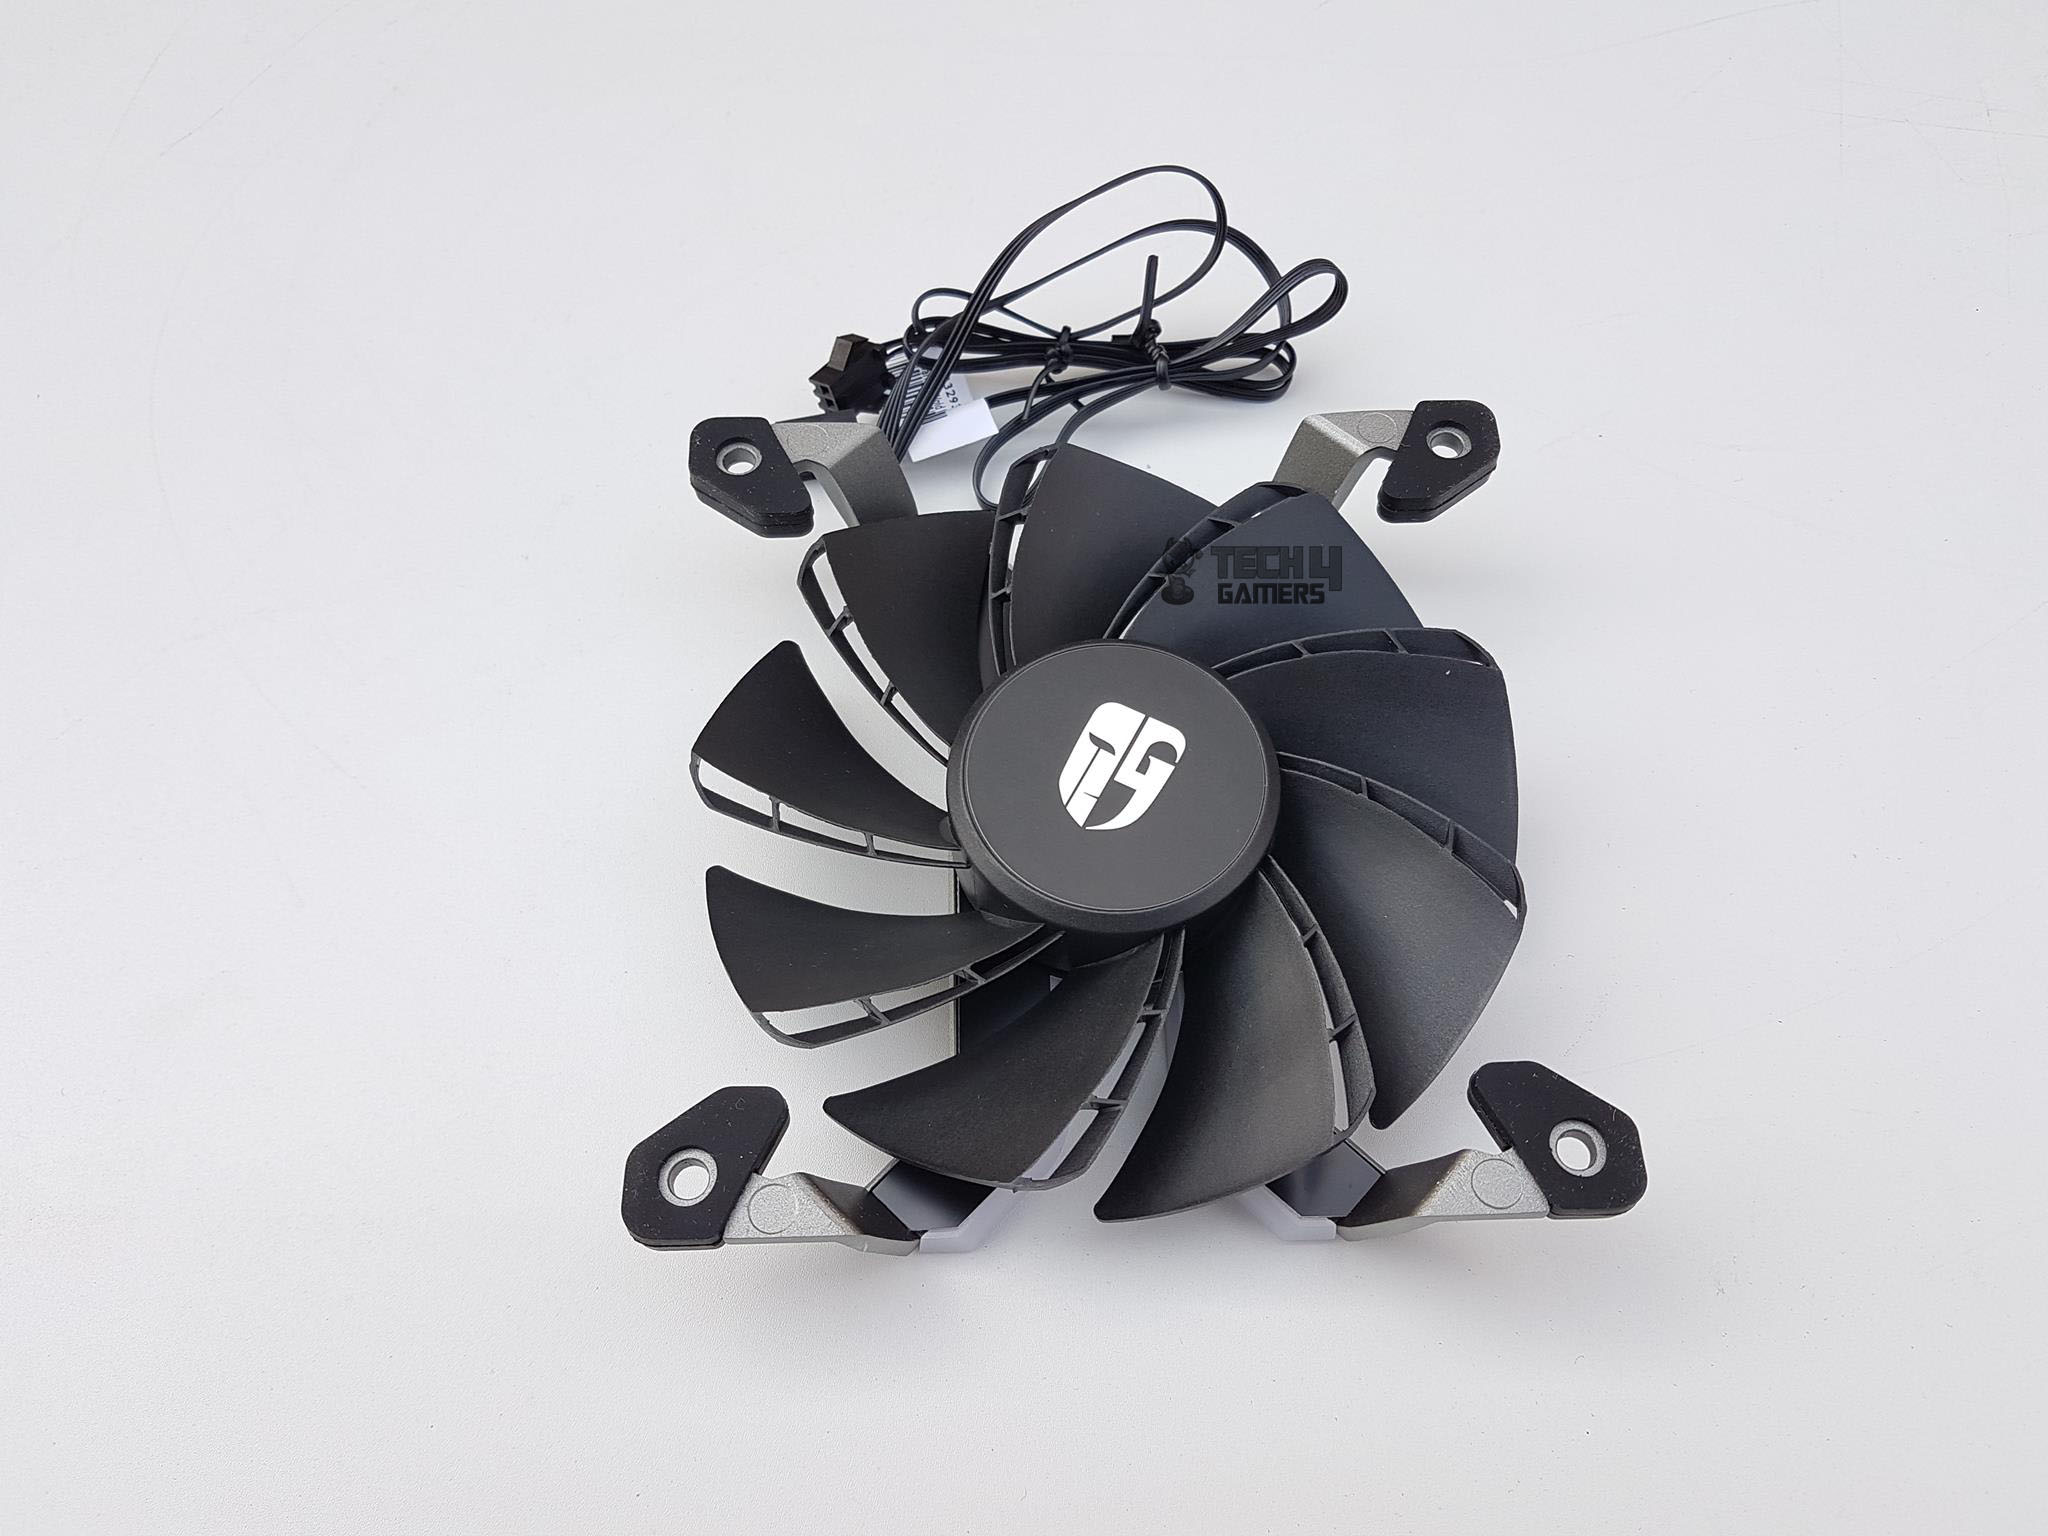 Deepcool MF120S 3-Fans Pack — The blades